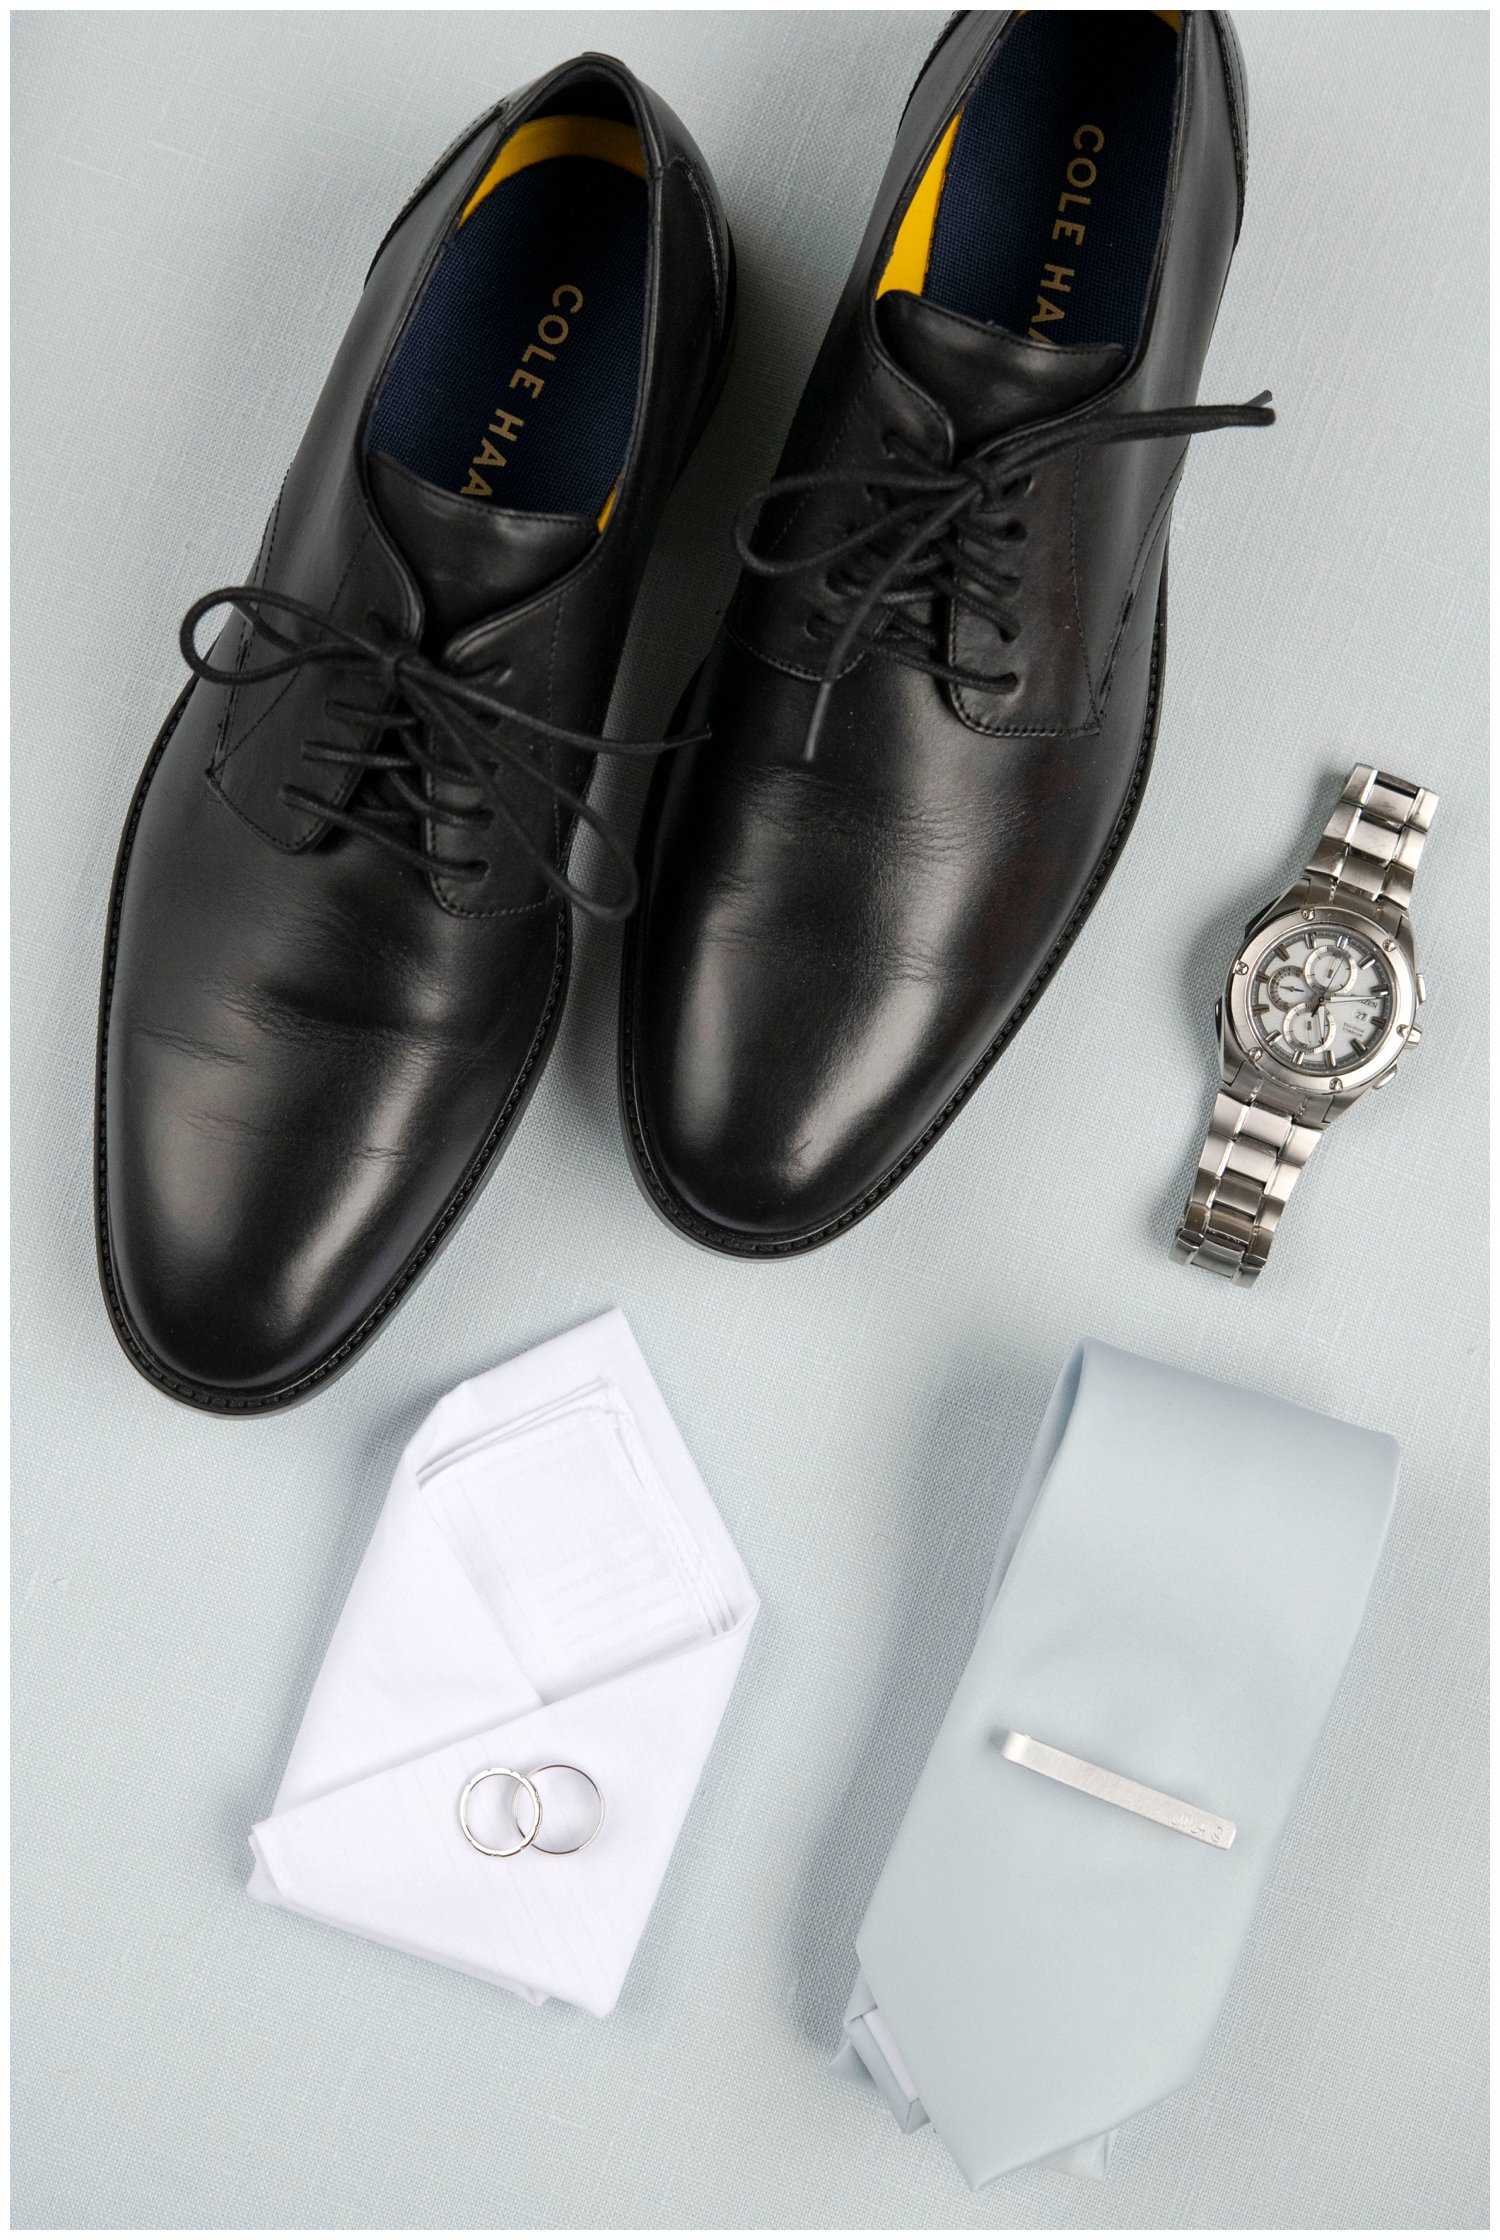 groom details flatlay with shoes and tie